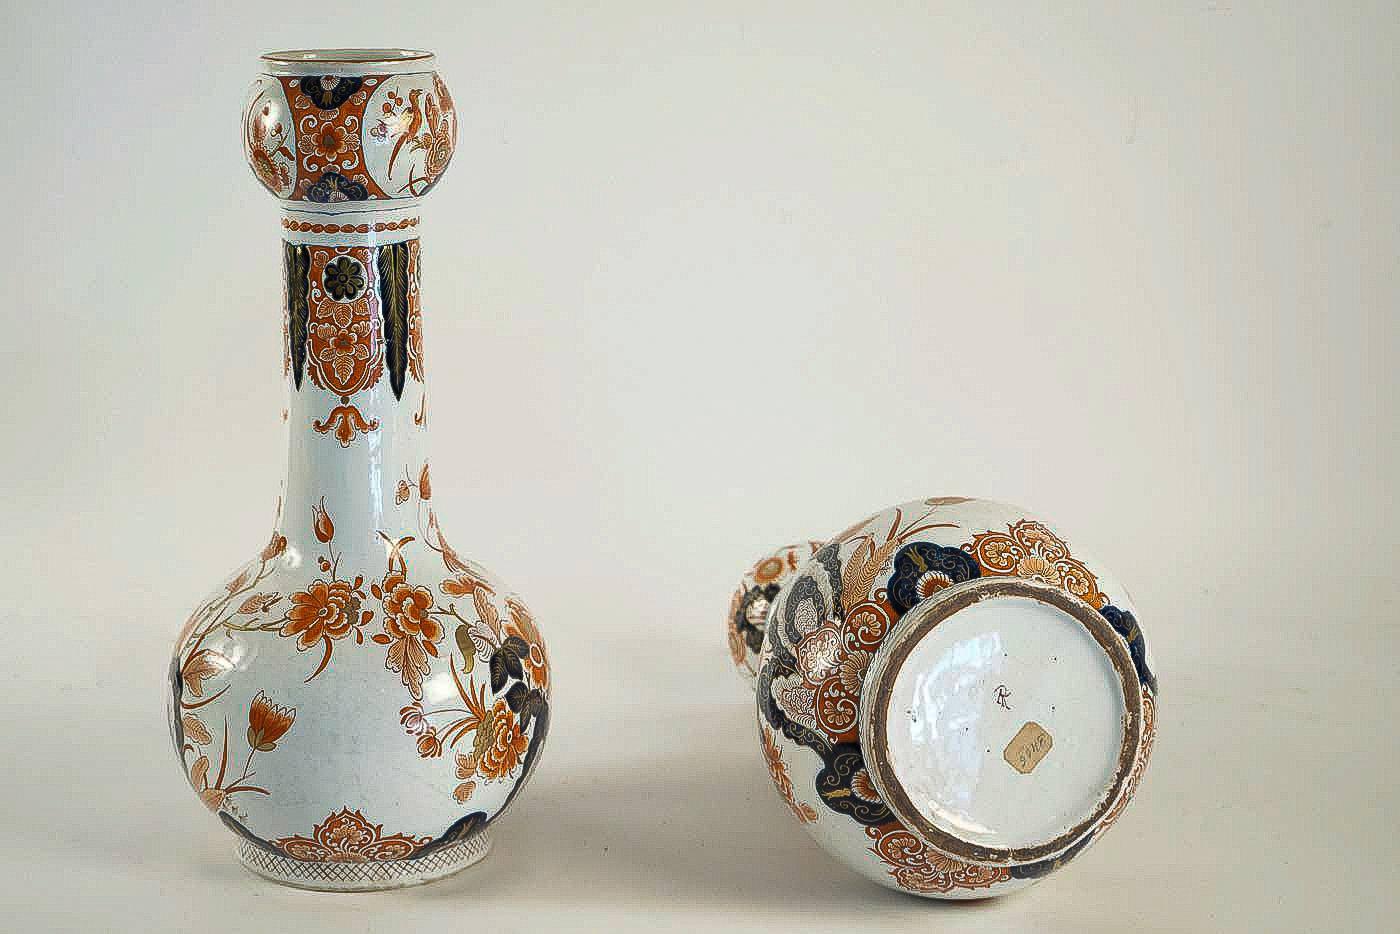 Dutch Late-18th Century, Polychrome Delft Faience Pair of Gourd-Shaped Vases For Sale 7